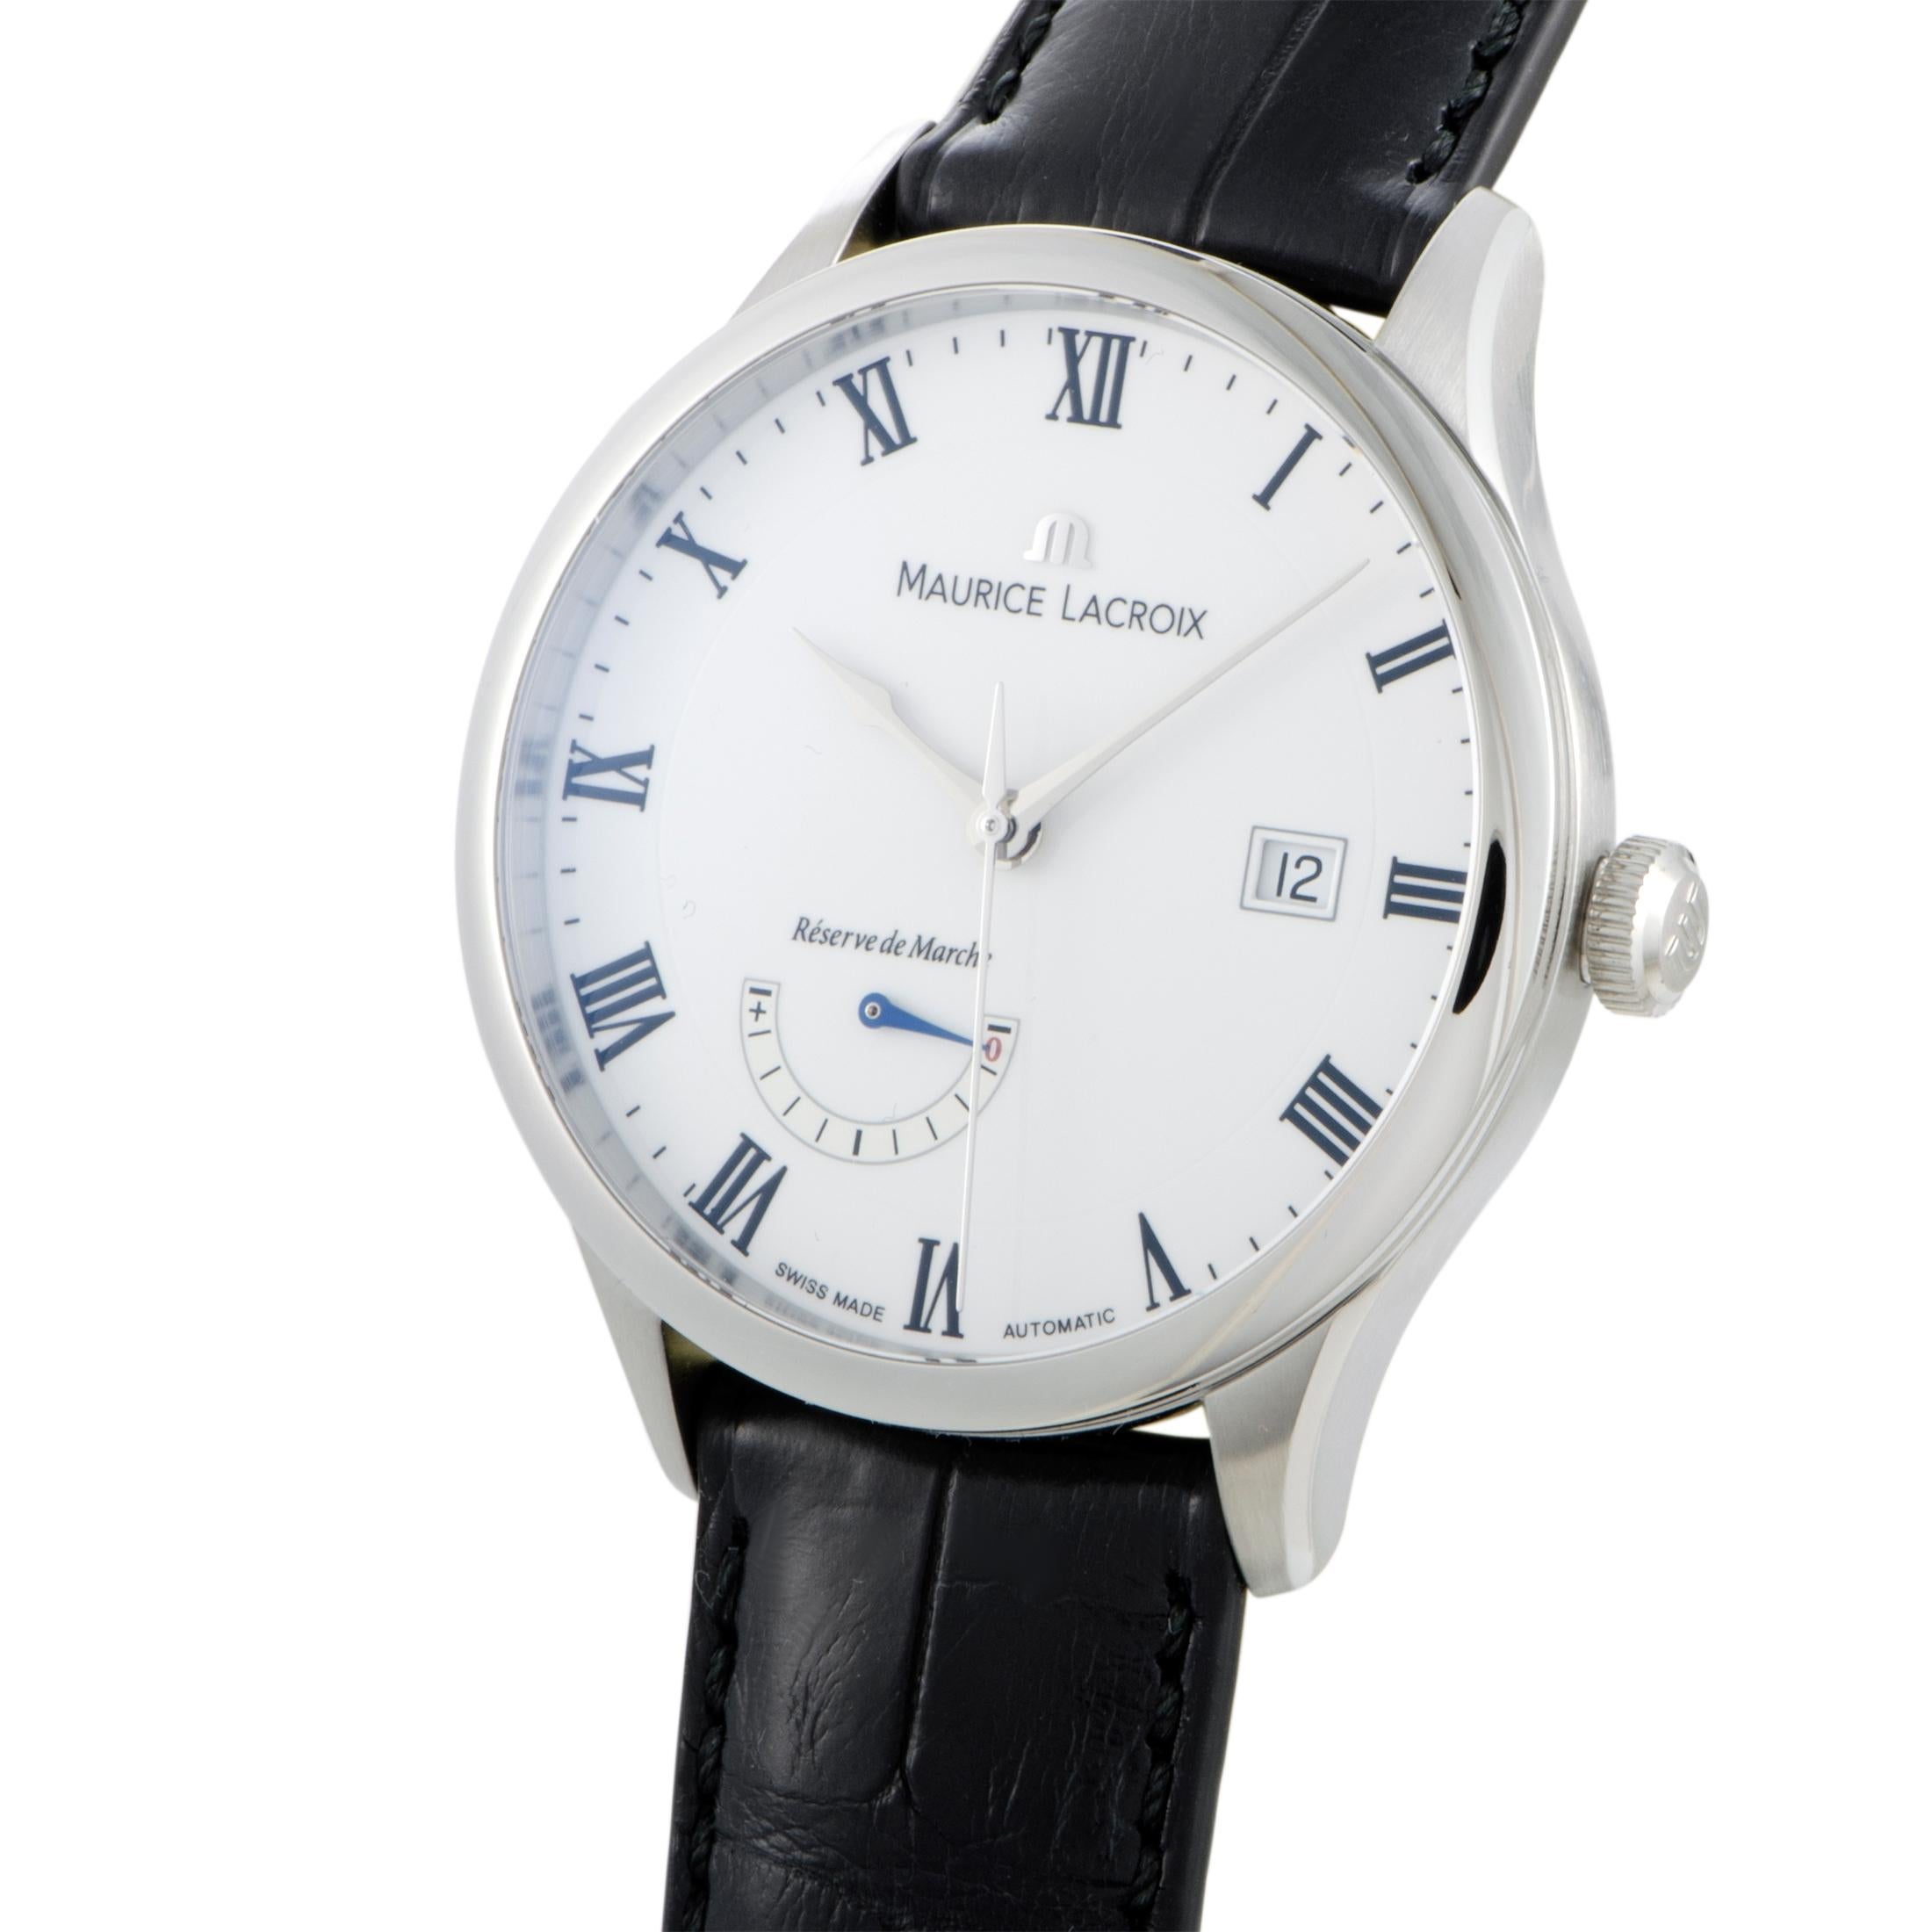 With its extremely tasteful and splendidly subtle design codes such as the neatly stylized numerals, wonderfully clear dial, and elegant contrast of the minimalistic two-toned appearance, this remarkable timepiece from Maurice Lacroix offers a look